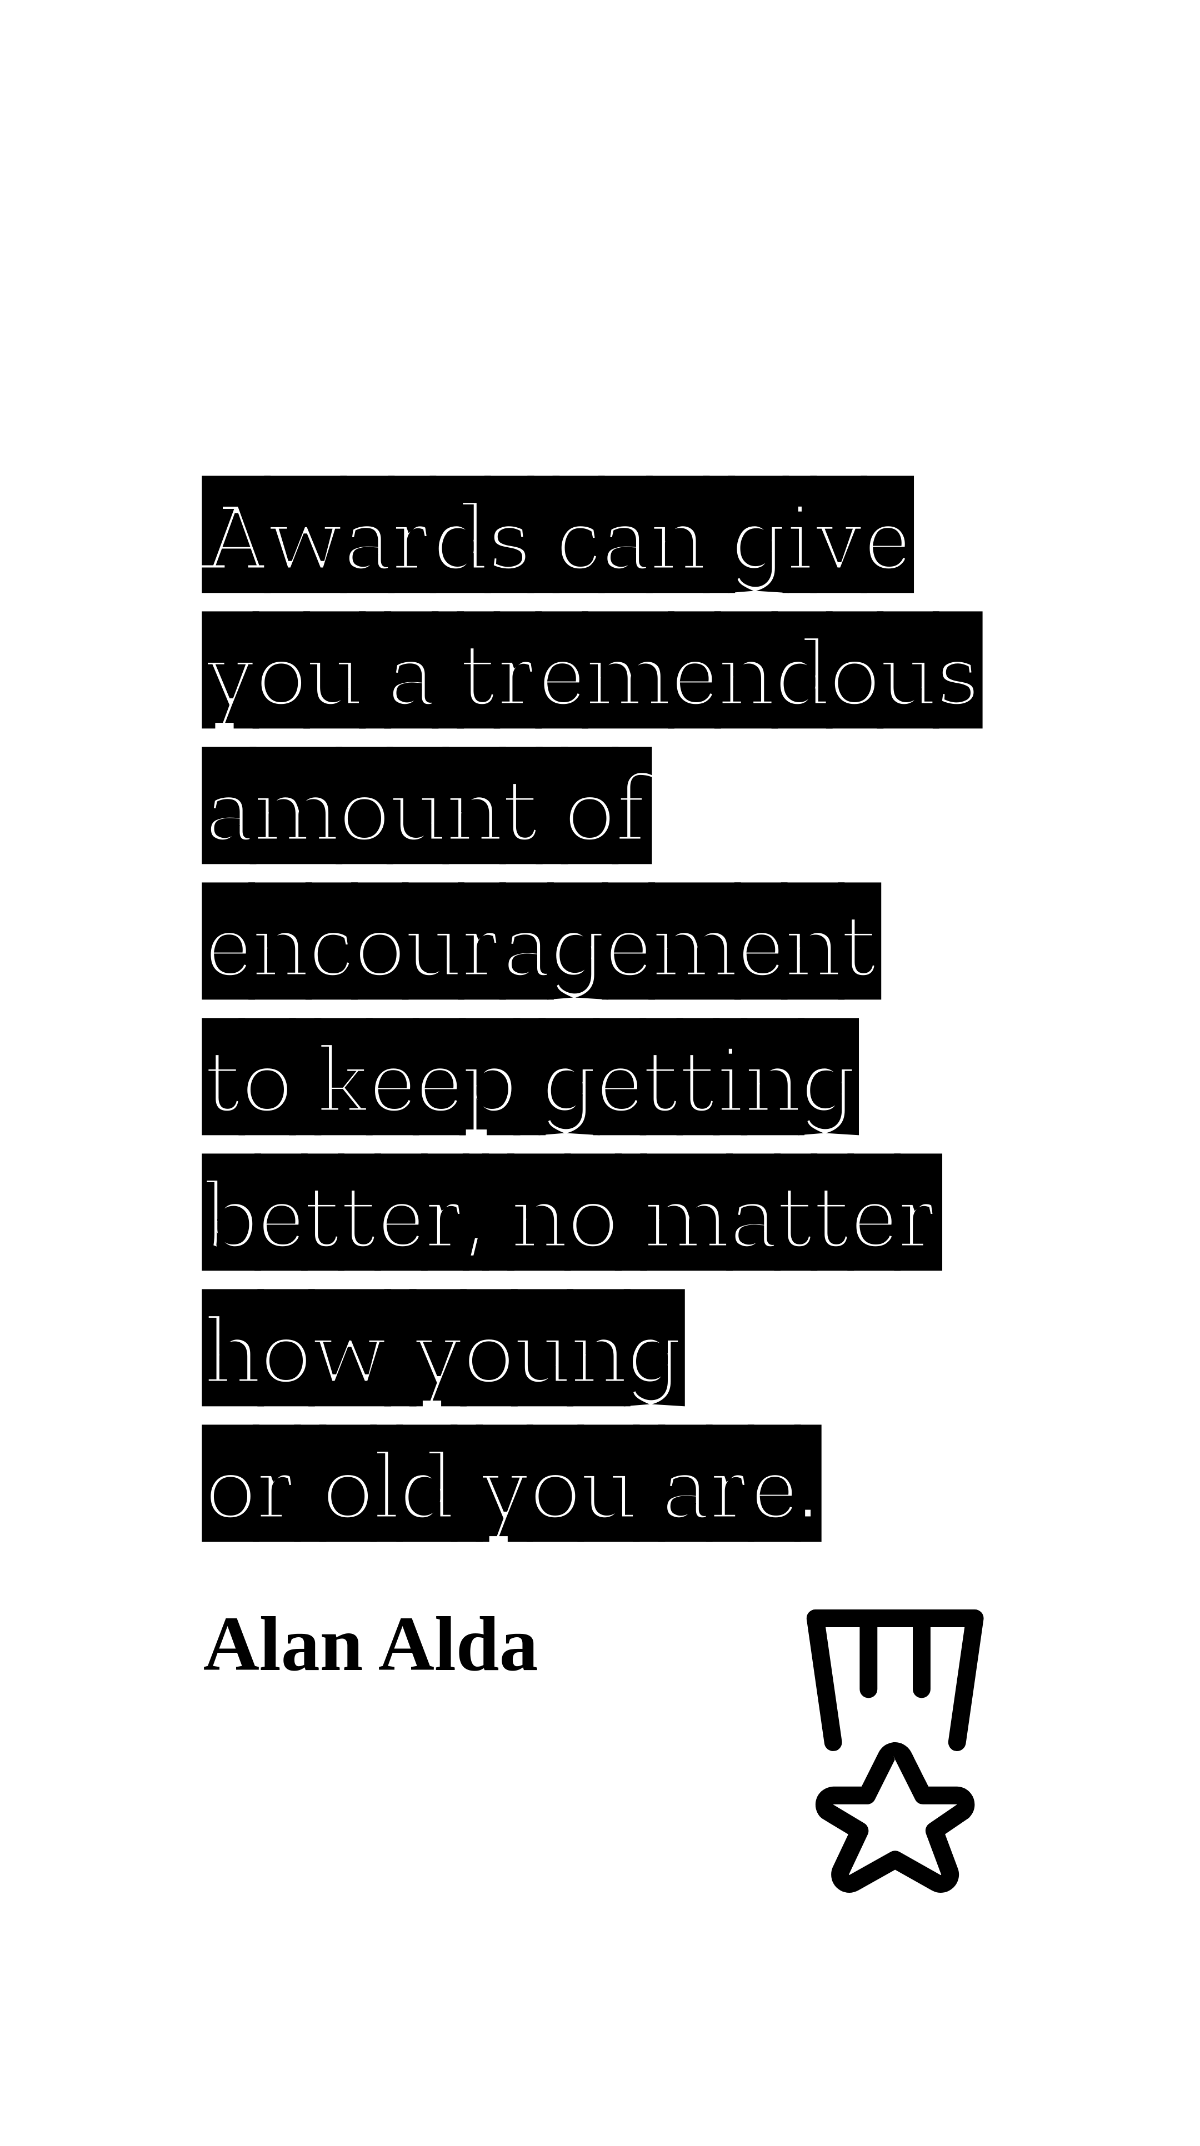 Free Alan Alda - Awards can give you a tremendous amount of encouragement to keep getting better, no matter how young or old you are. Template